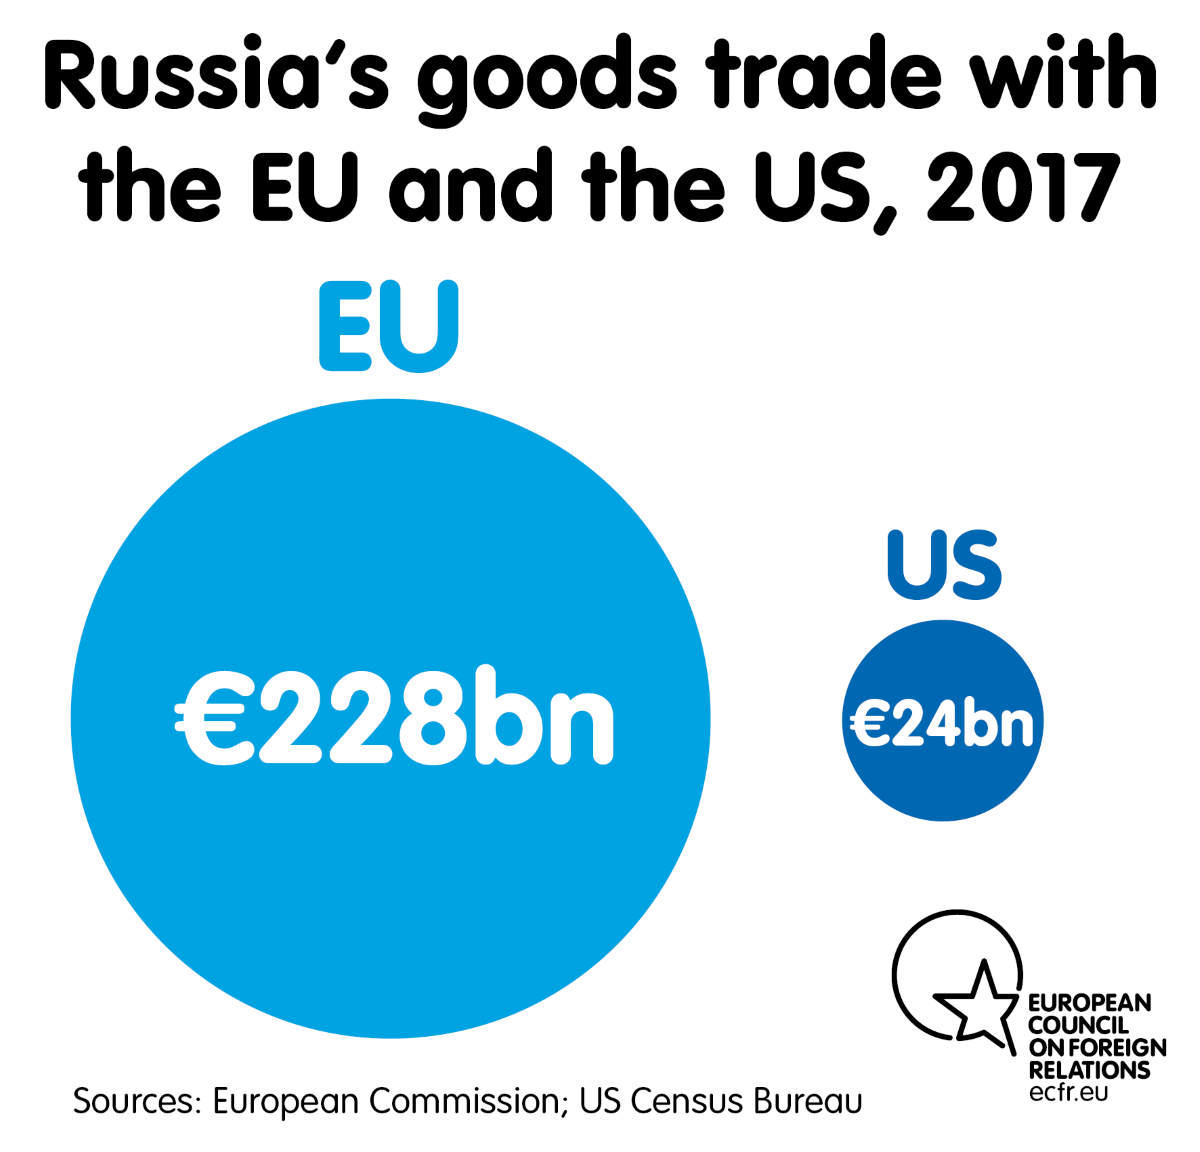 Russia's goods trade with the EU and the US, 2017